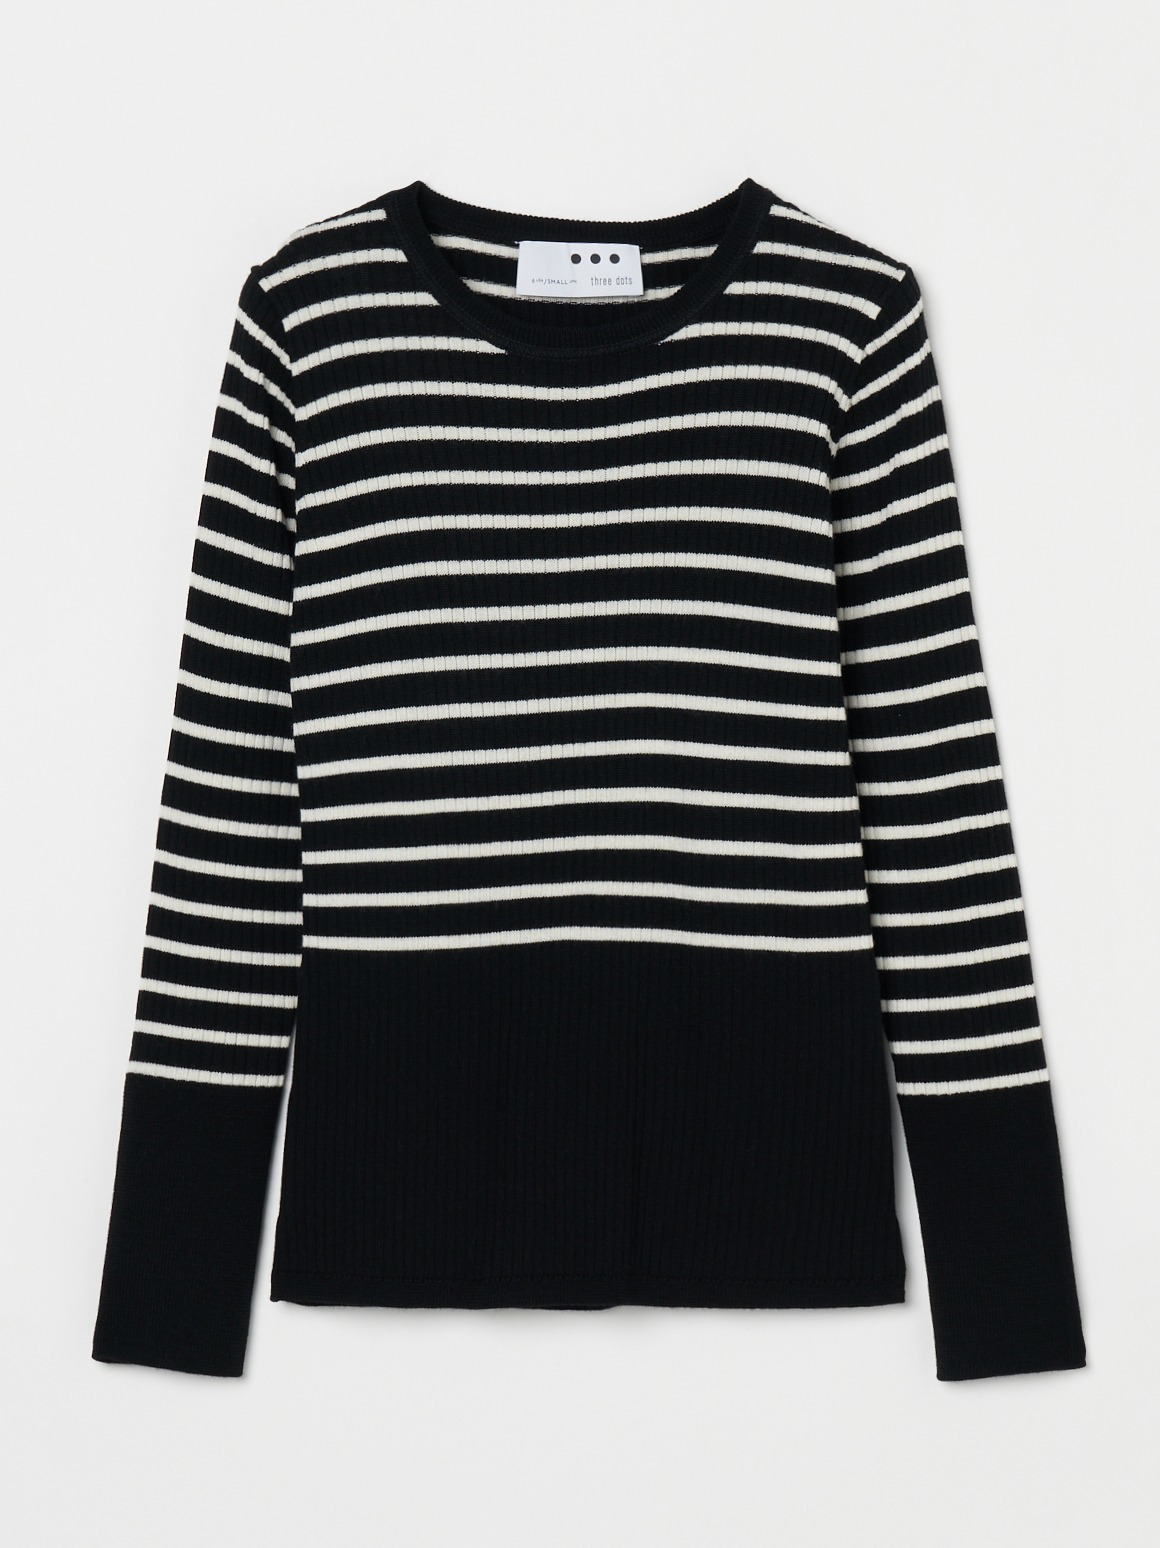 Wool outfit rib tee knit 詳細画像 black/off white 2